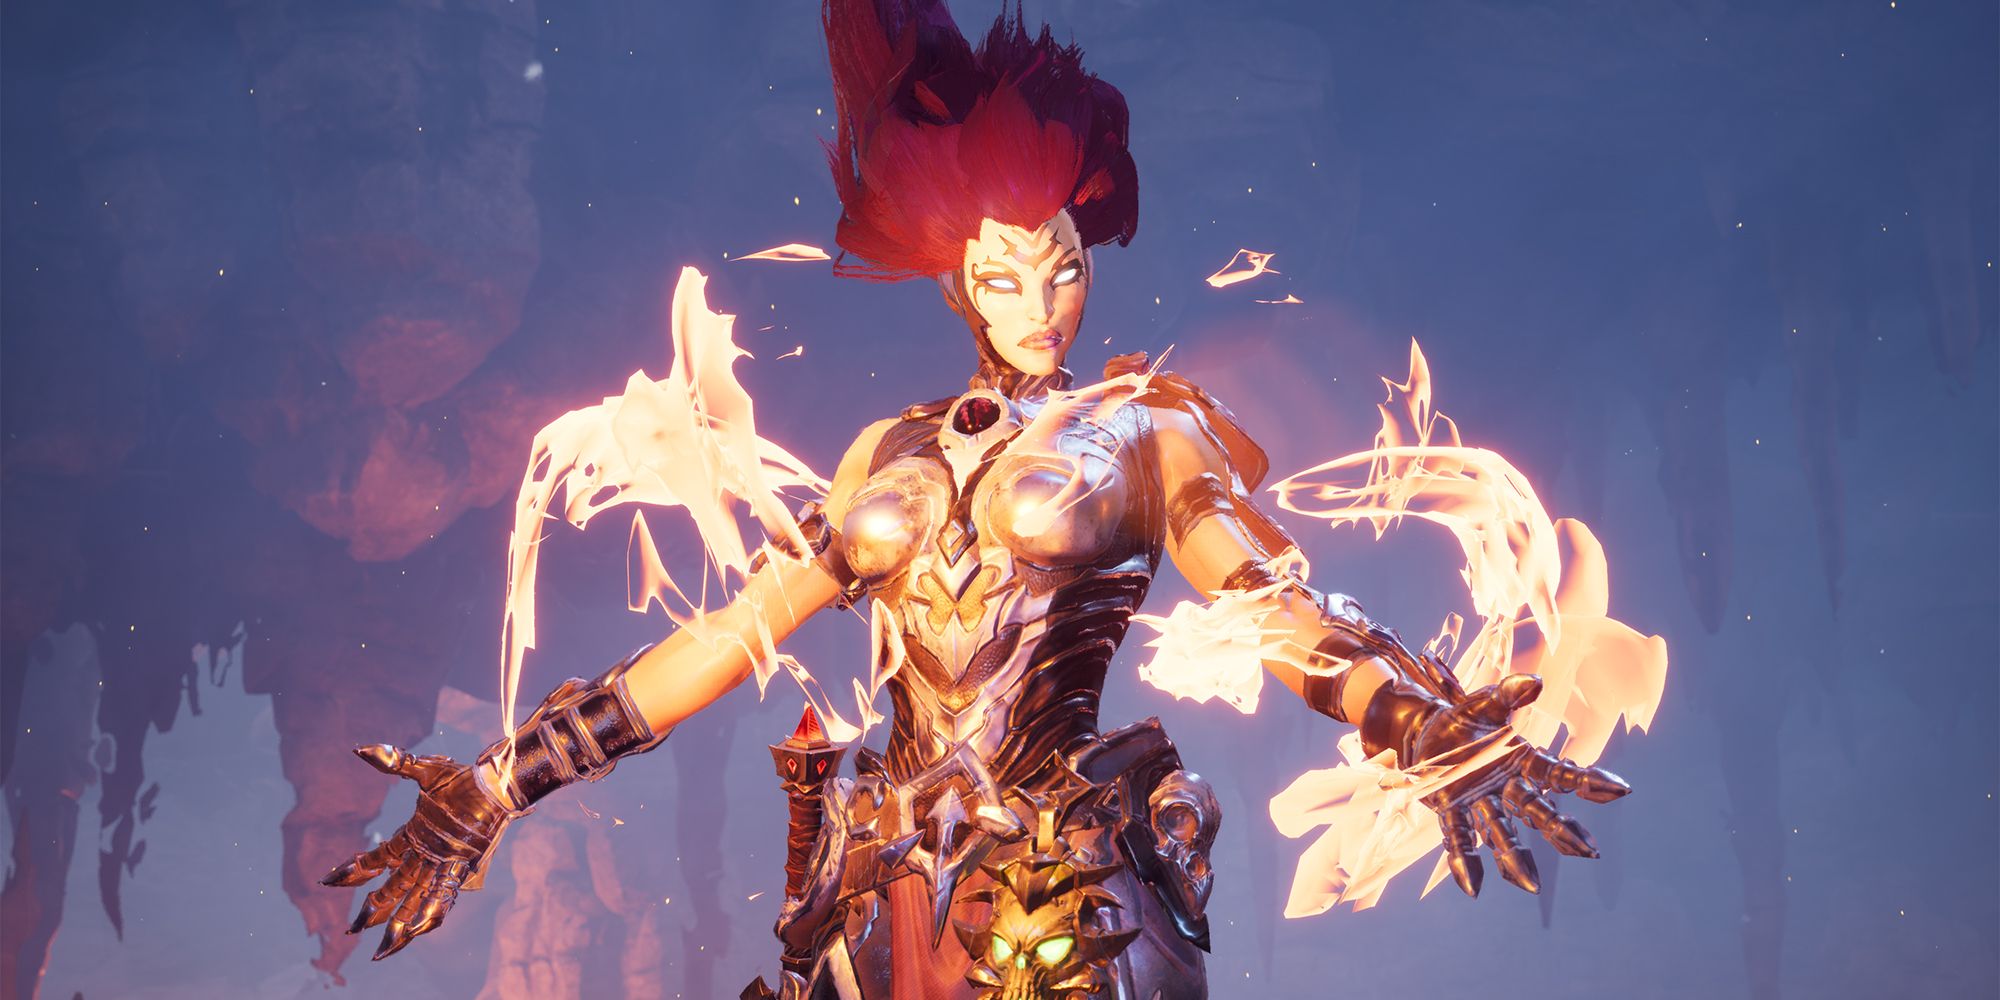 Darksiders 3 Beginners Guide Gameplay Tips & Hints To Get Started